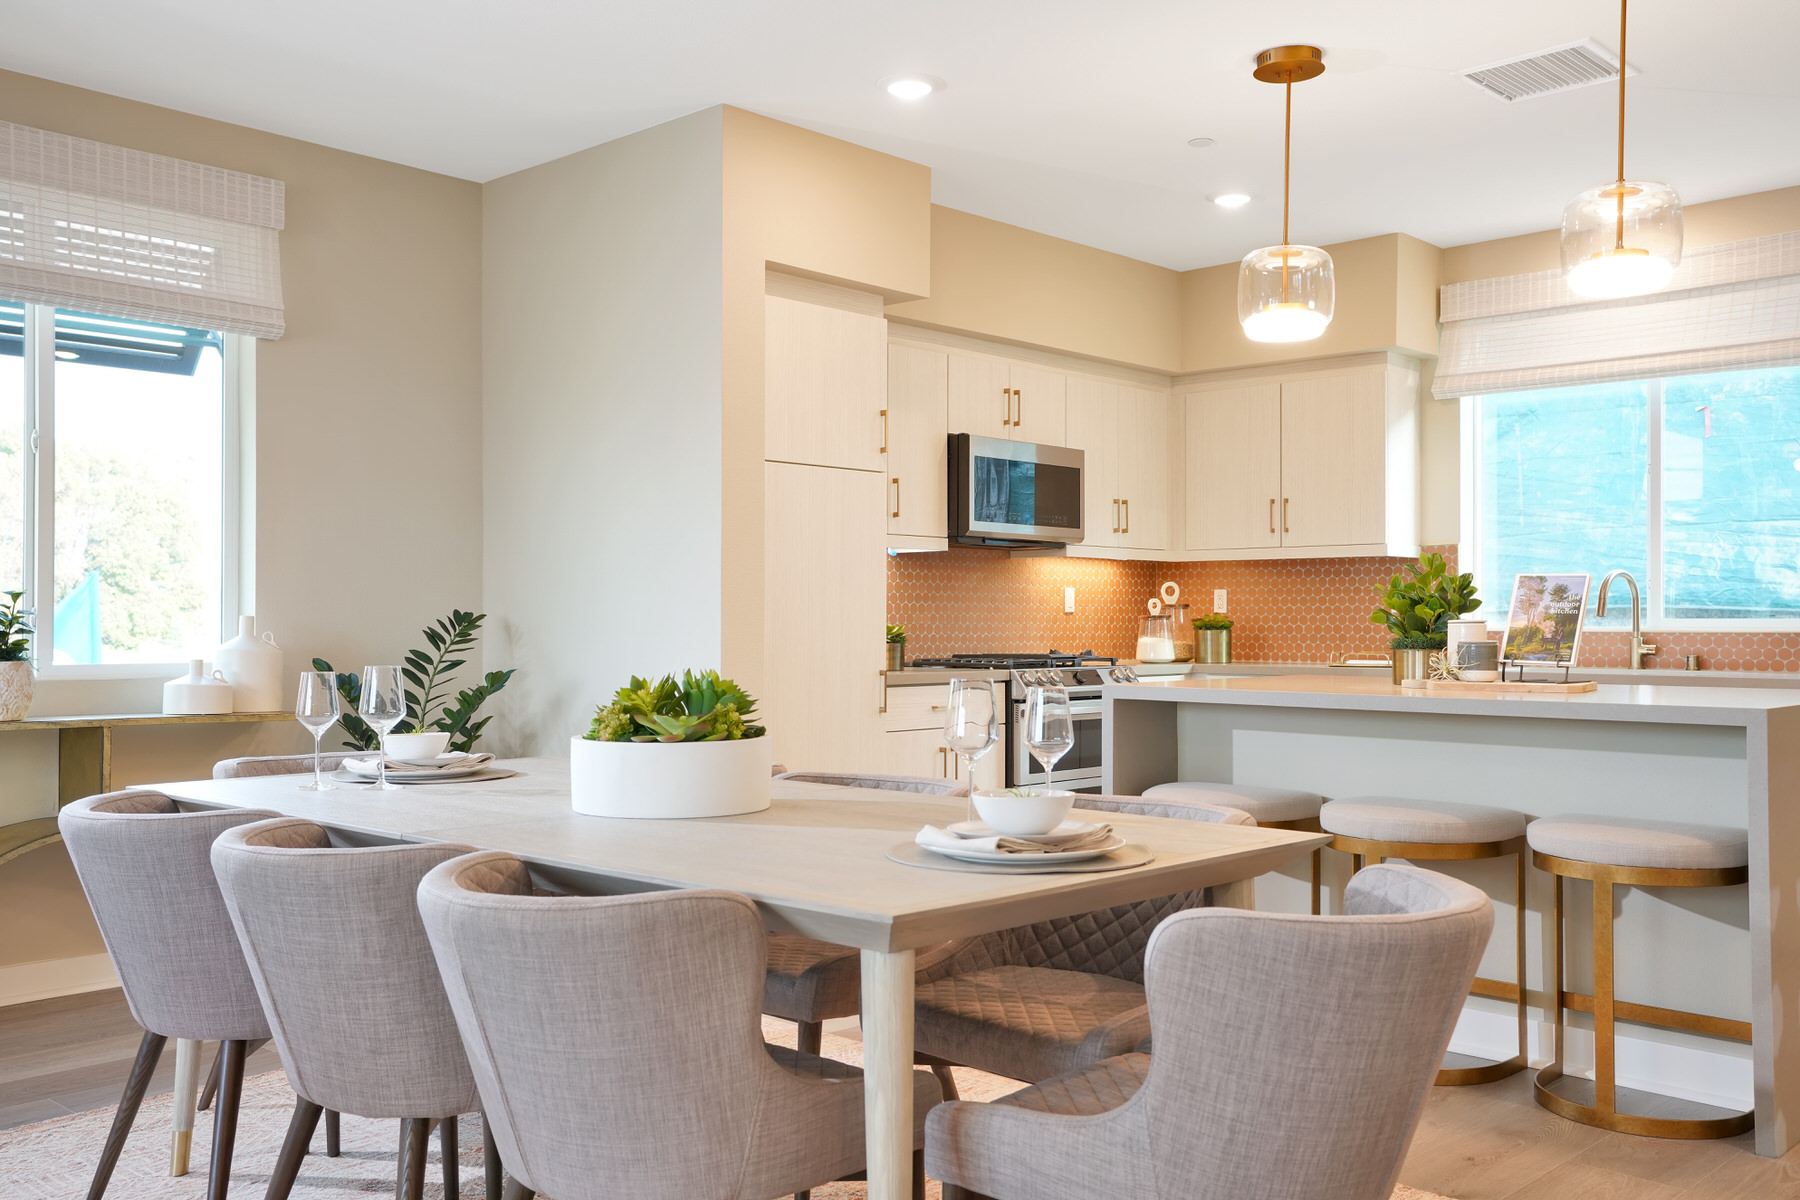 Dining/Kitchen in Plan 4A at Townes at Magnolia by Melia Homes in Anaheim, CA